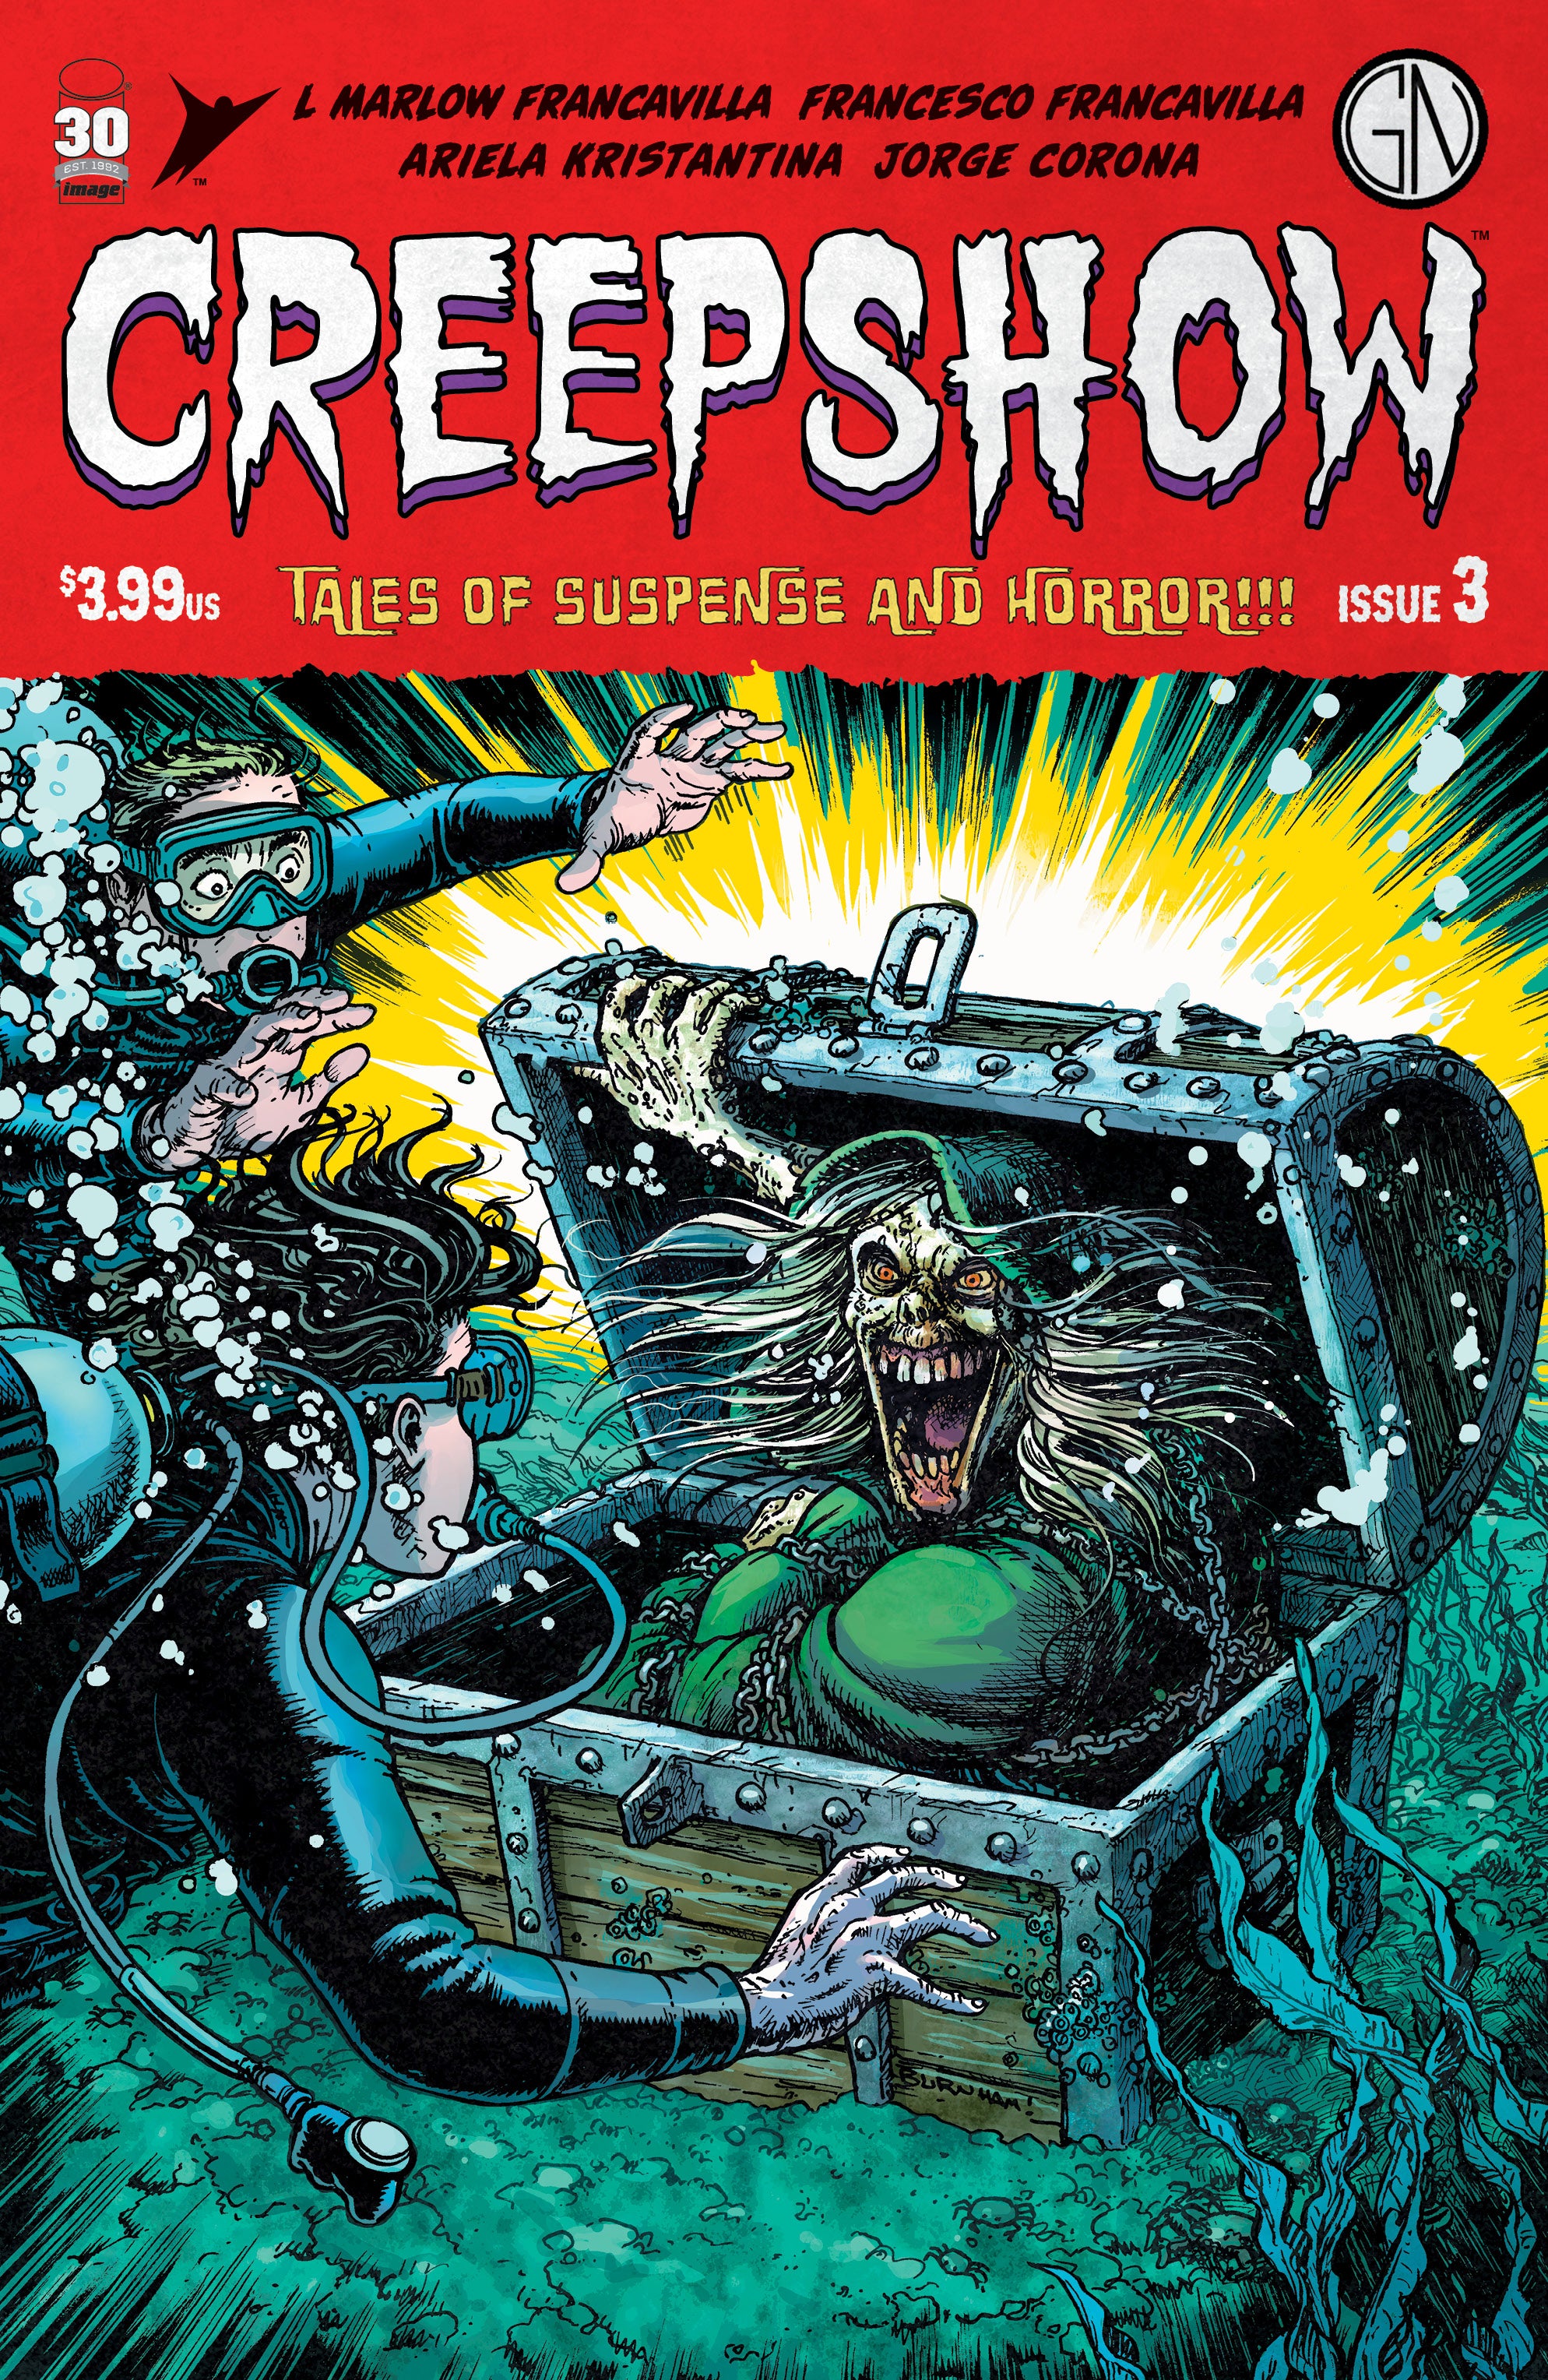 Could watch these movies all day. Which Creepshow was your favorite? ... |  TikTok